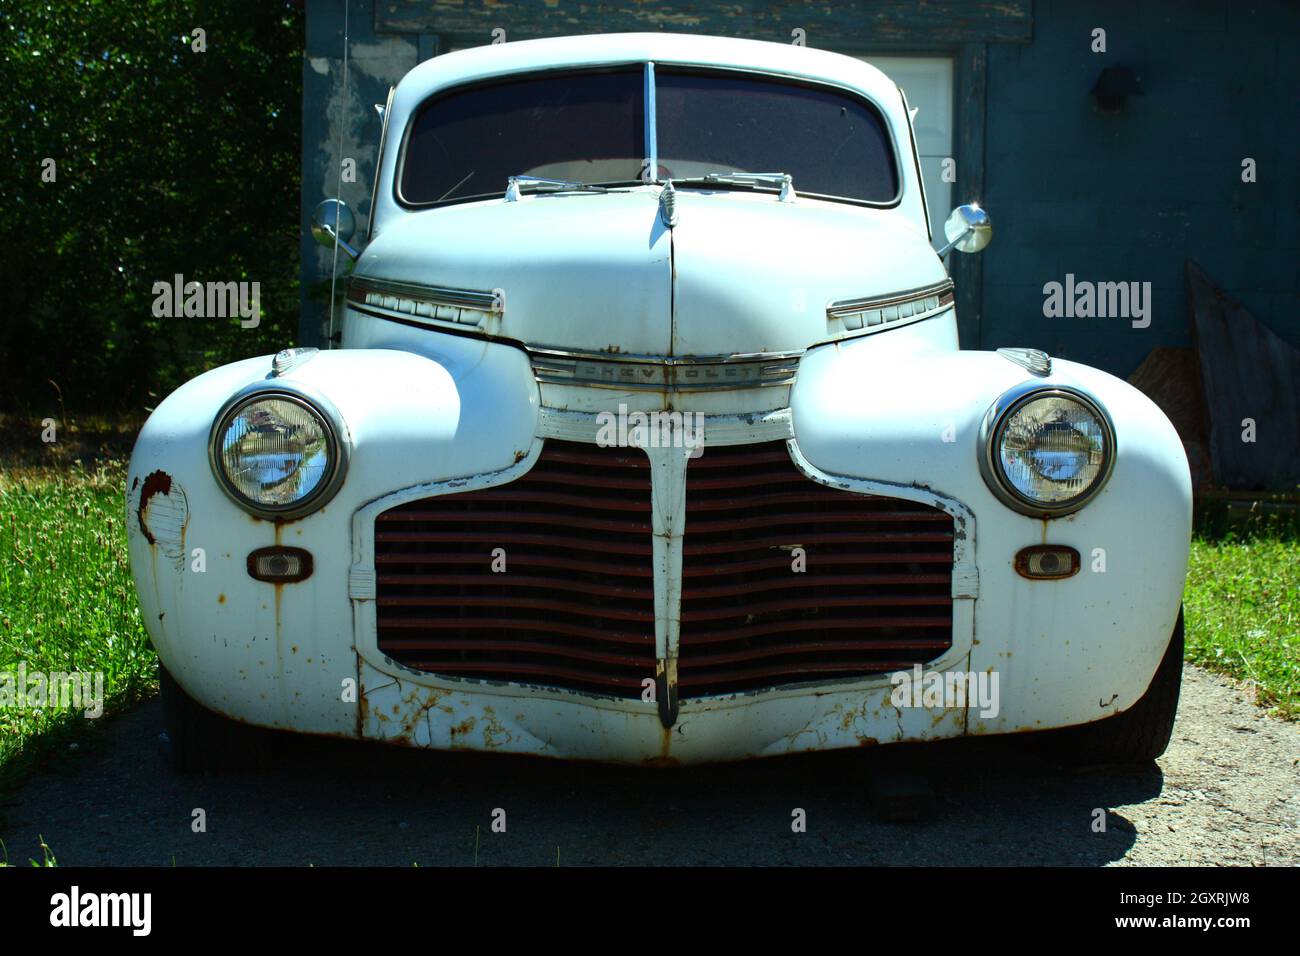 Head-on shot of a clean white vintage car flanked by grass on either side Stock Photo